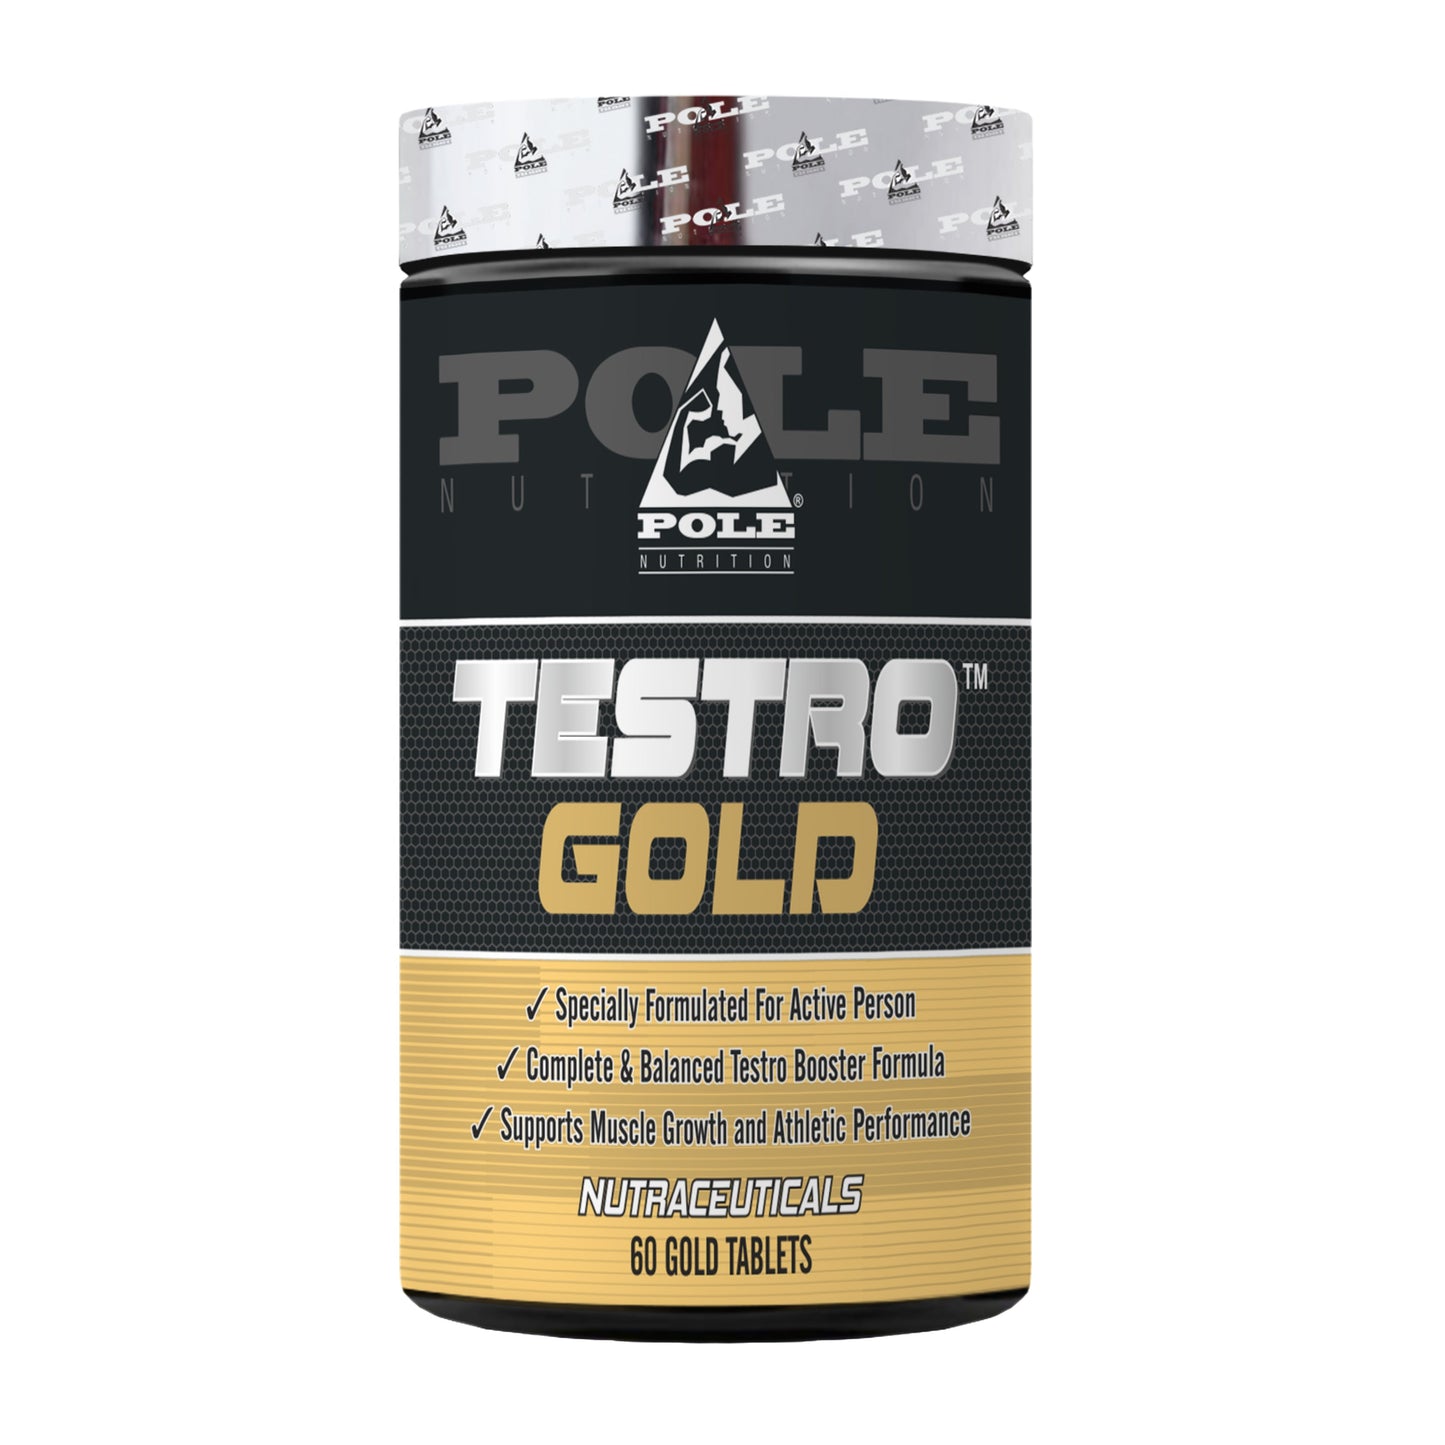 Testro Gold, 60 Gold Tablets